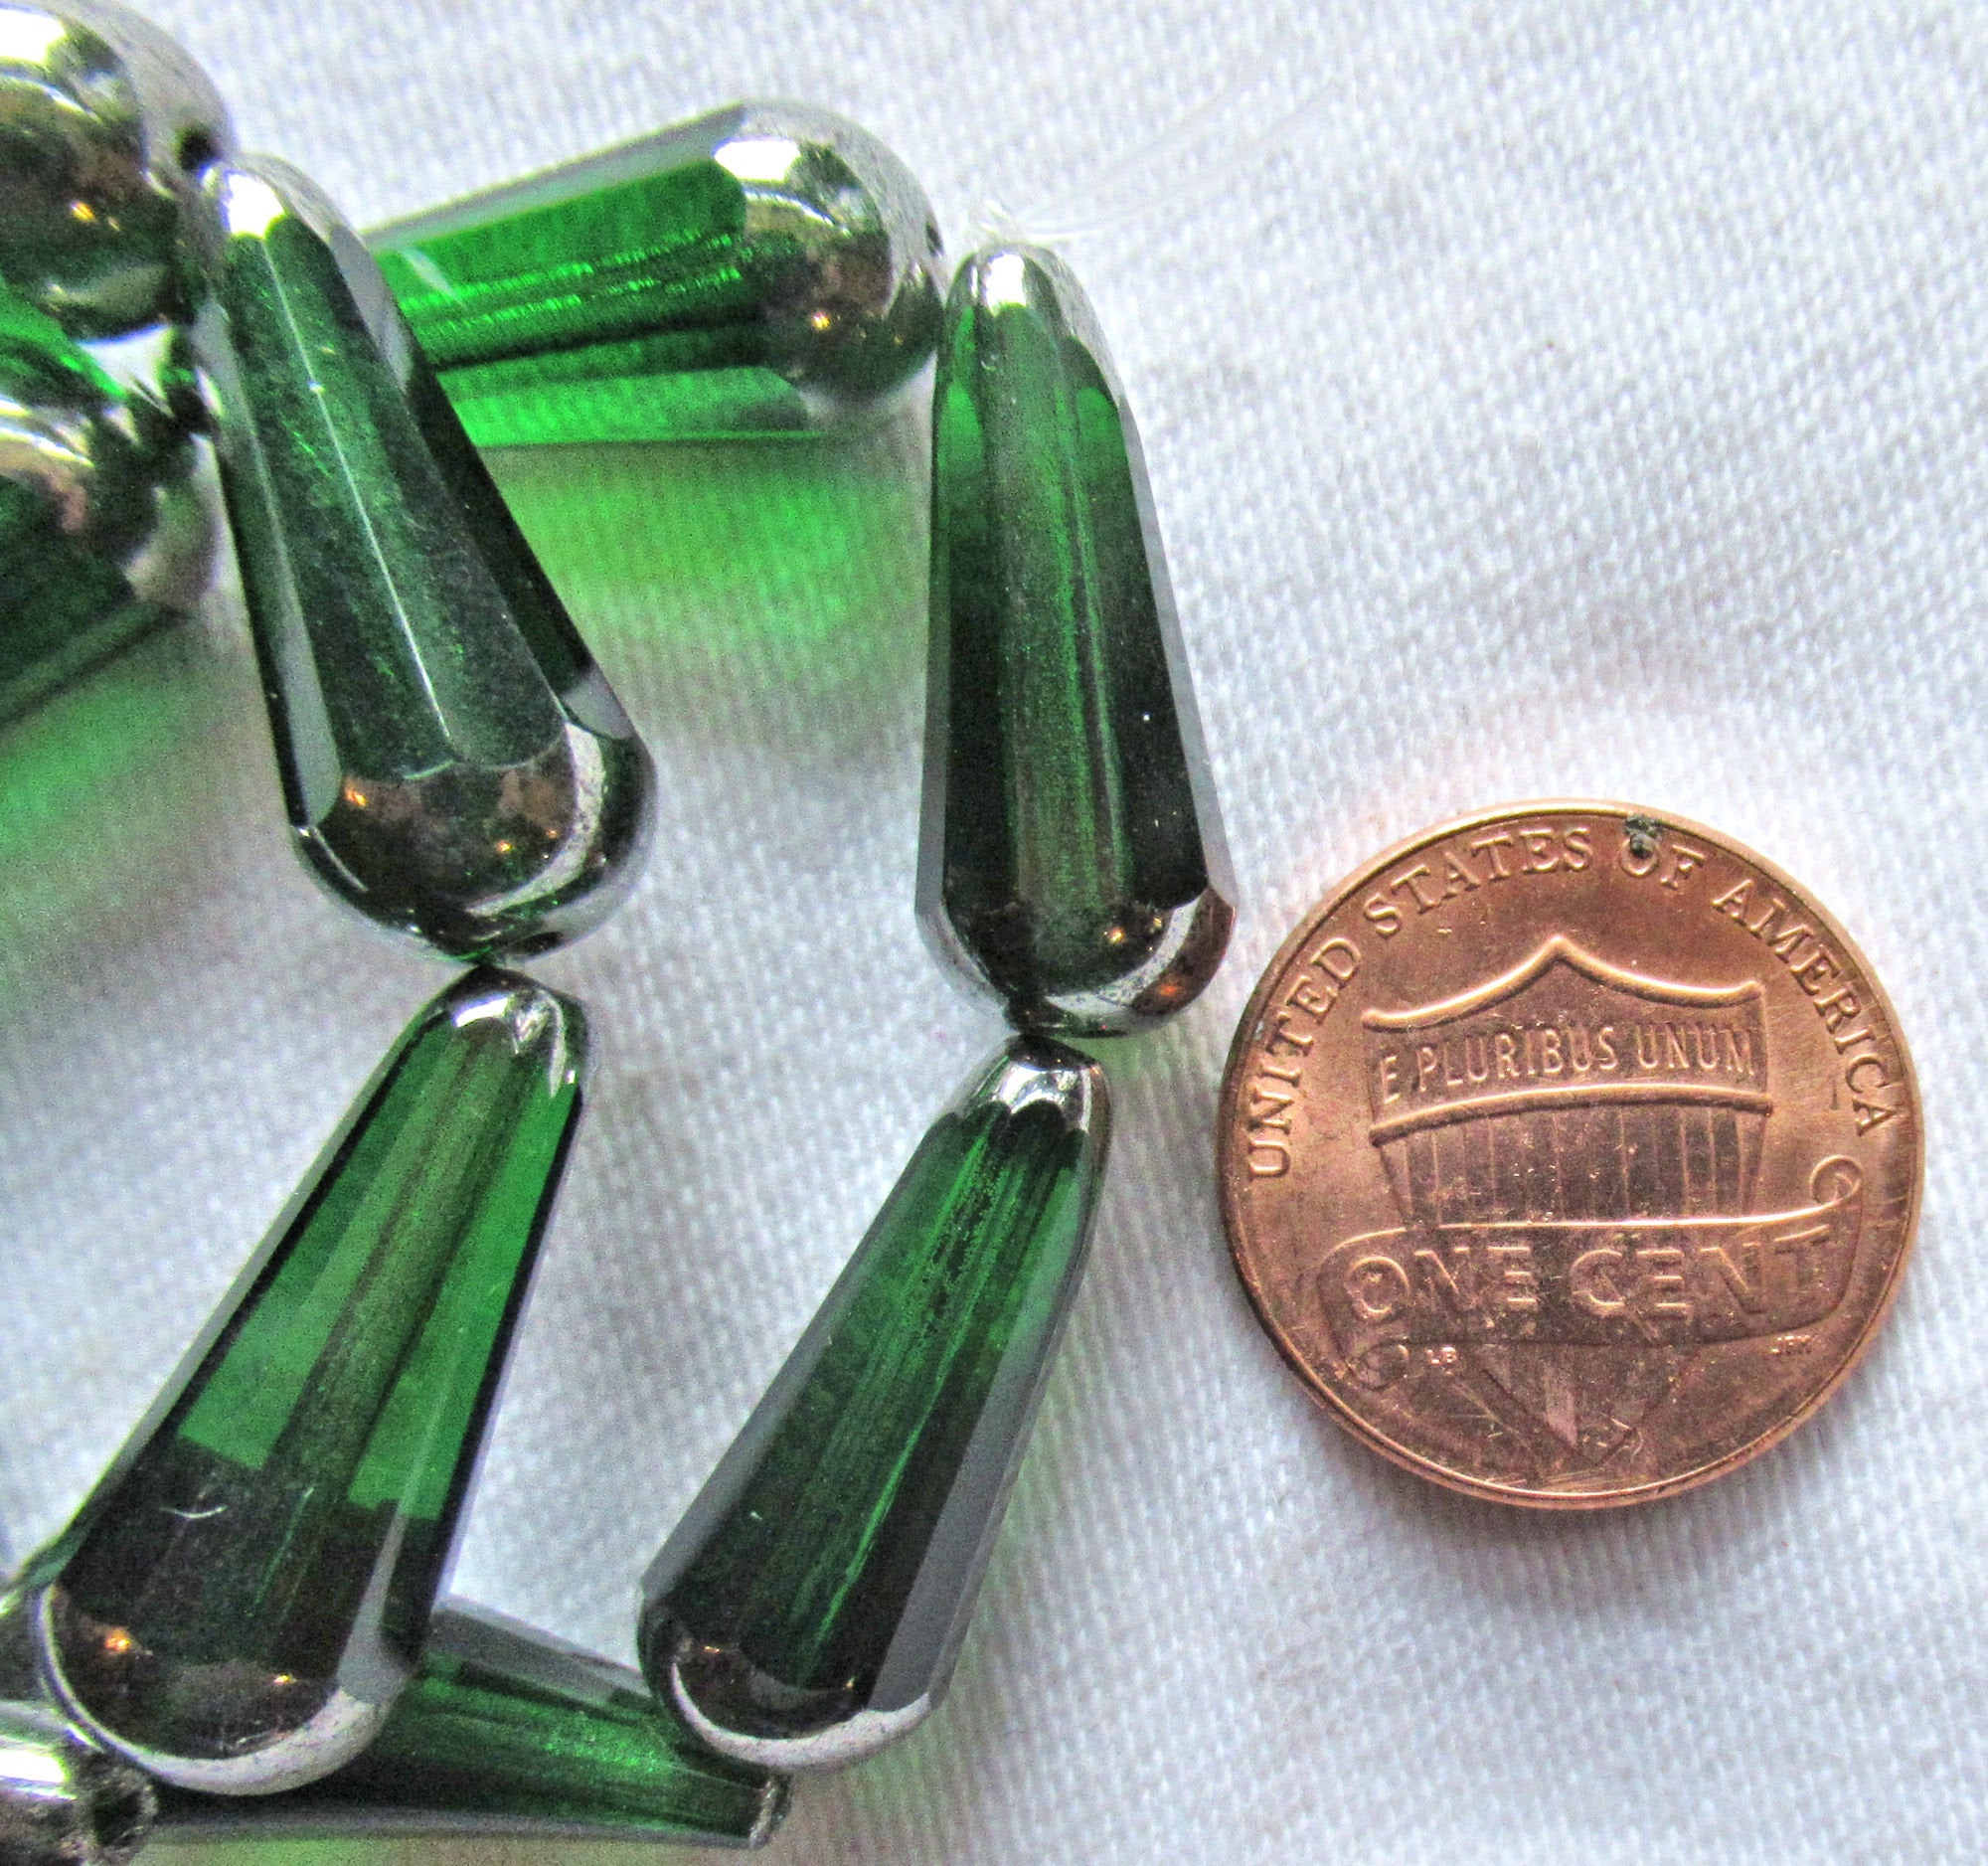 Faceted Glass European Style Large Hole Bead - Emerald Green 14mm (1)